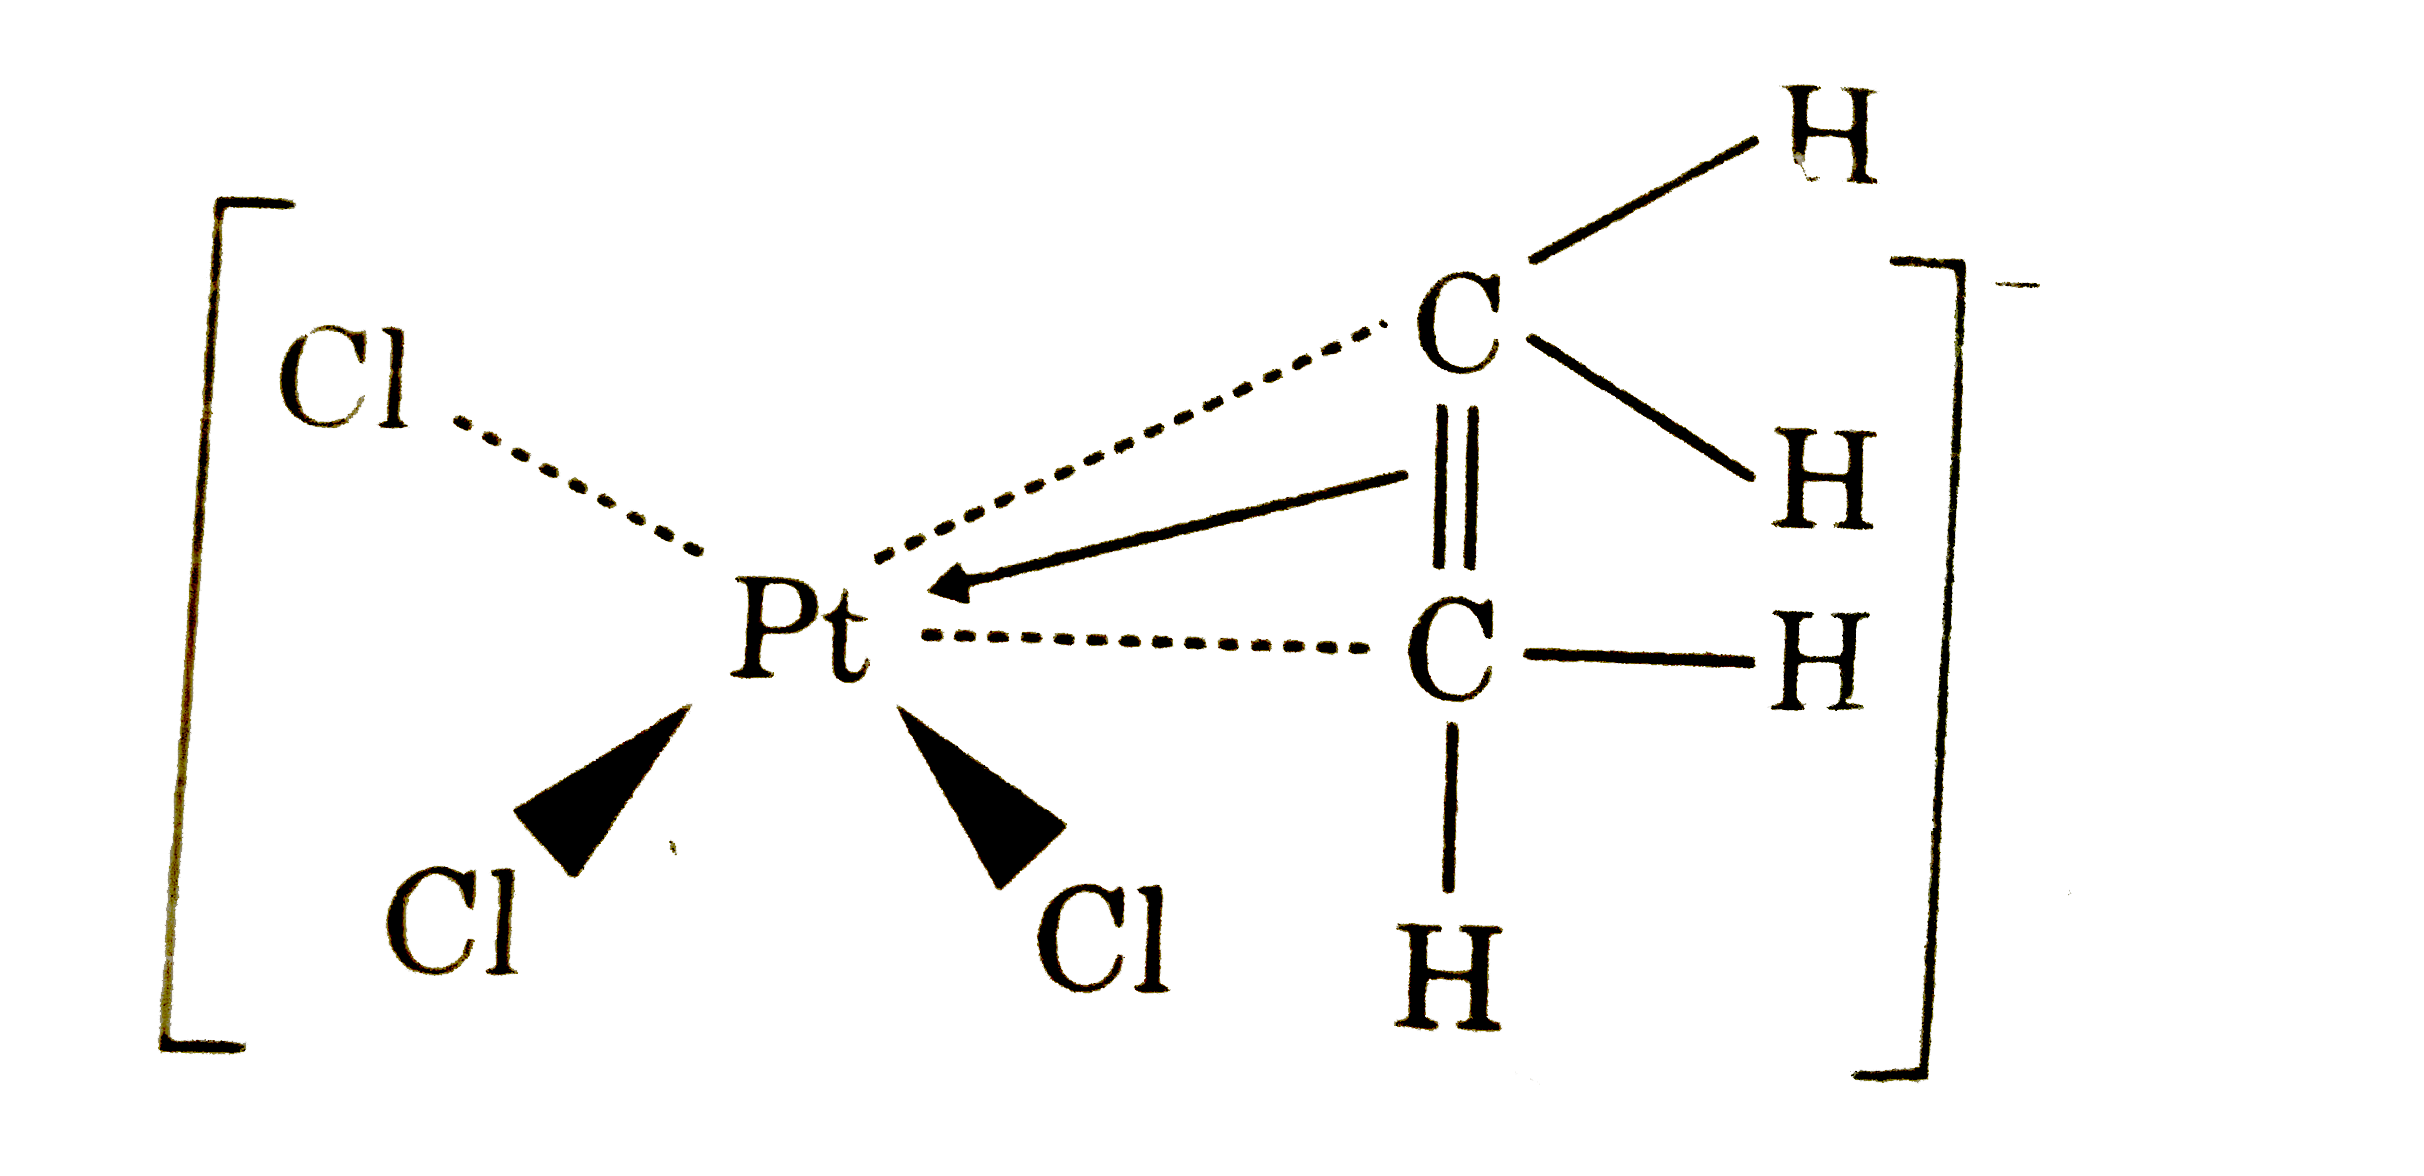 Anionic part of Zeise's salt is an organometallic compound :      Select the correct statement for Zeise's salt :